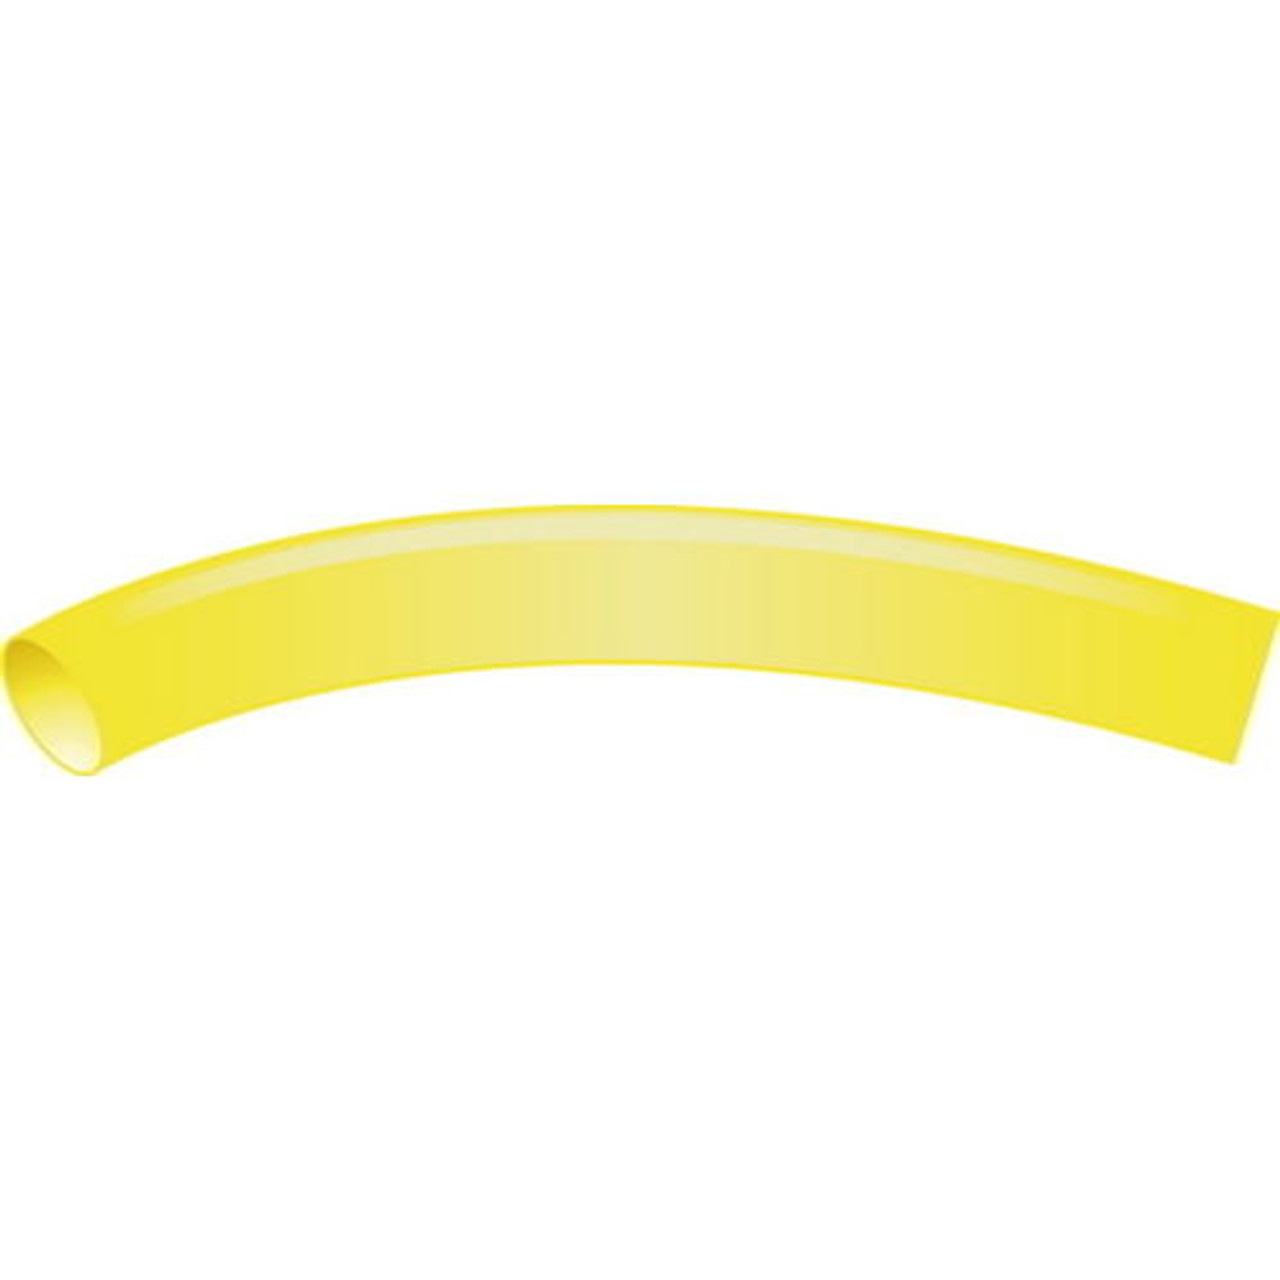 Yellow 1/2 Inch x 48 Inch 3:1 Heat Shrink Tubing with Sealant for Boats